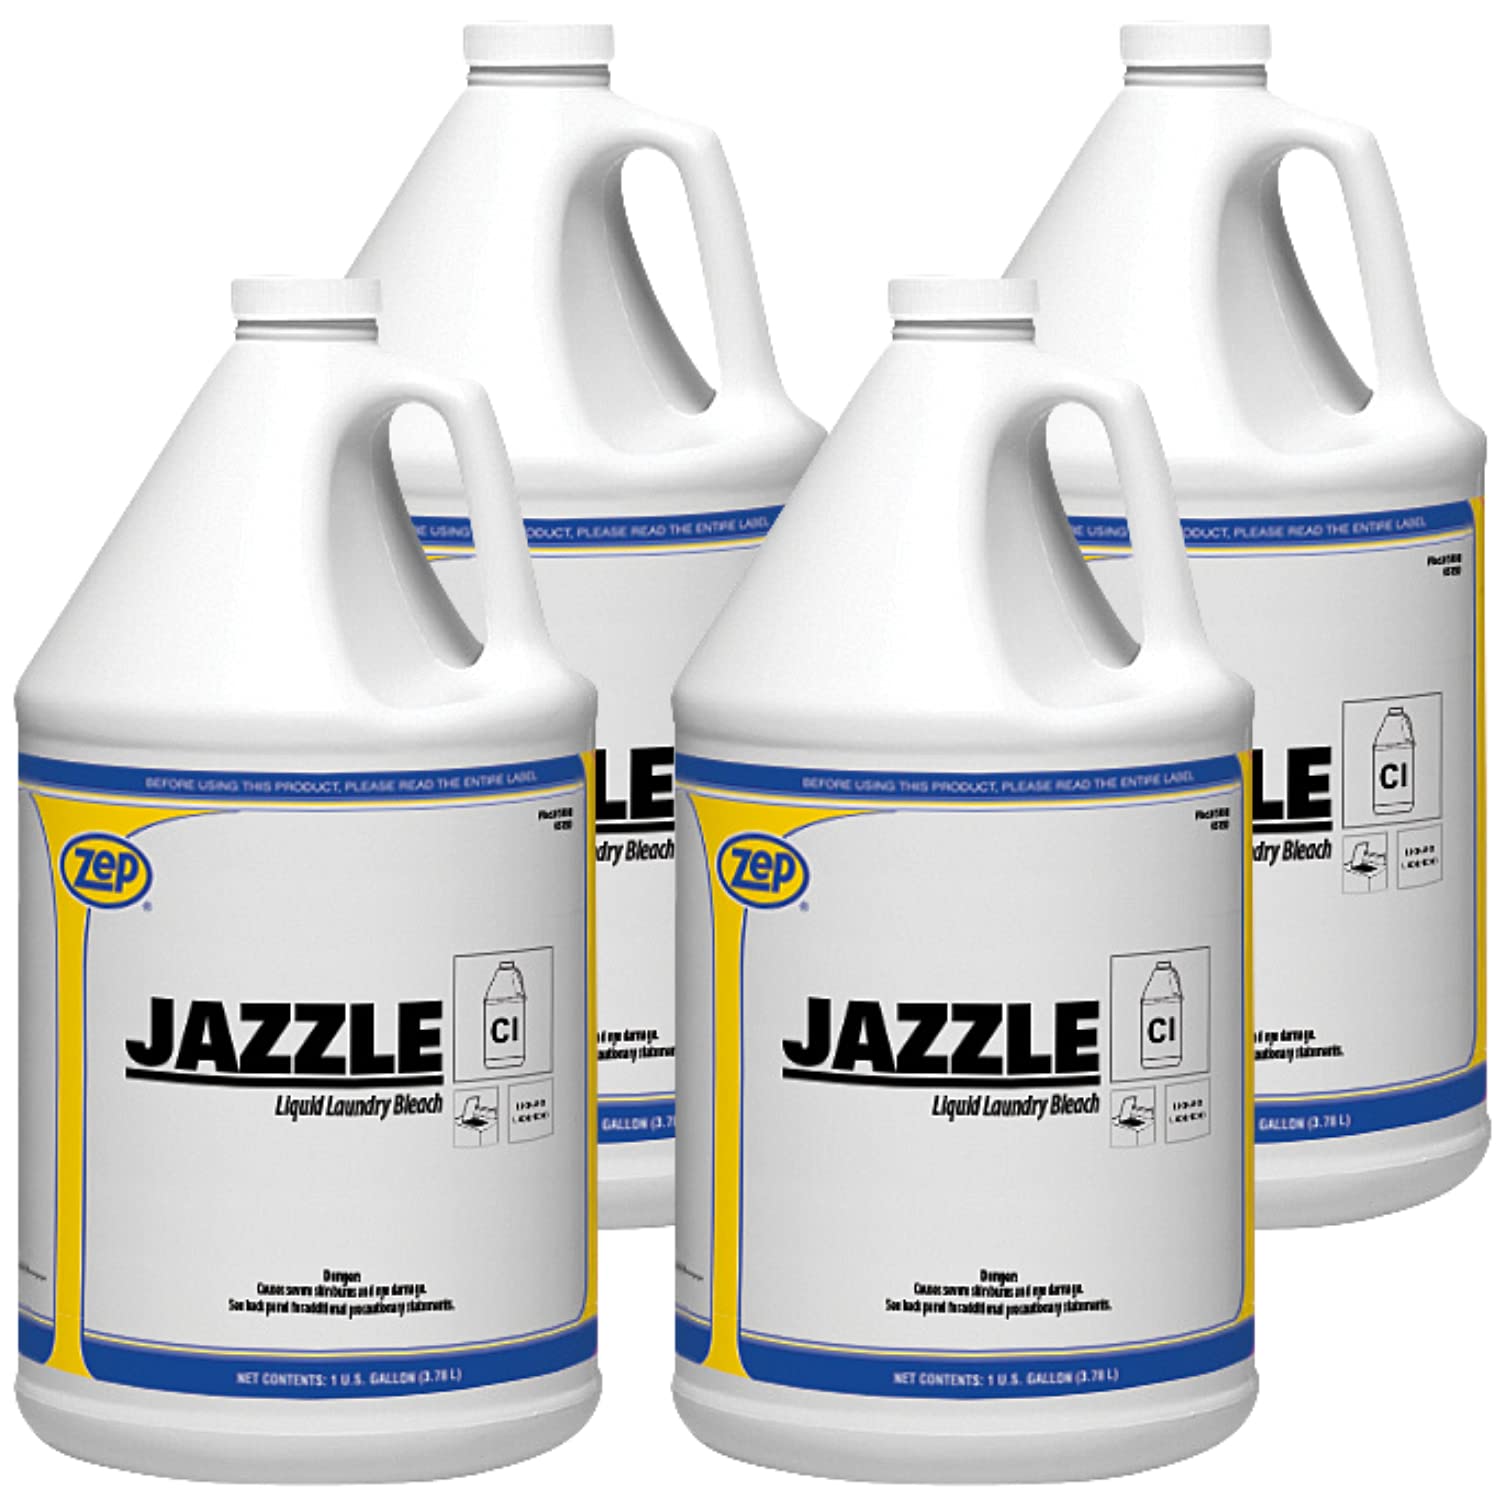 Zep Jazzle Liquid Chlorine Bleach - 1 Gallon (Case of 4) 540824 - for Use in Both Commercial and Residential Laundry Equipment